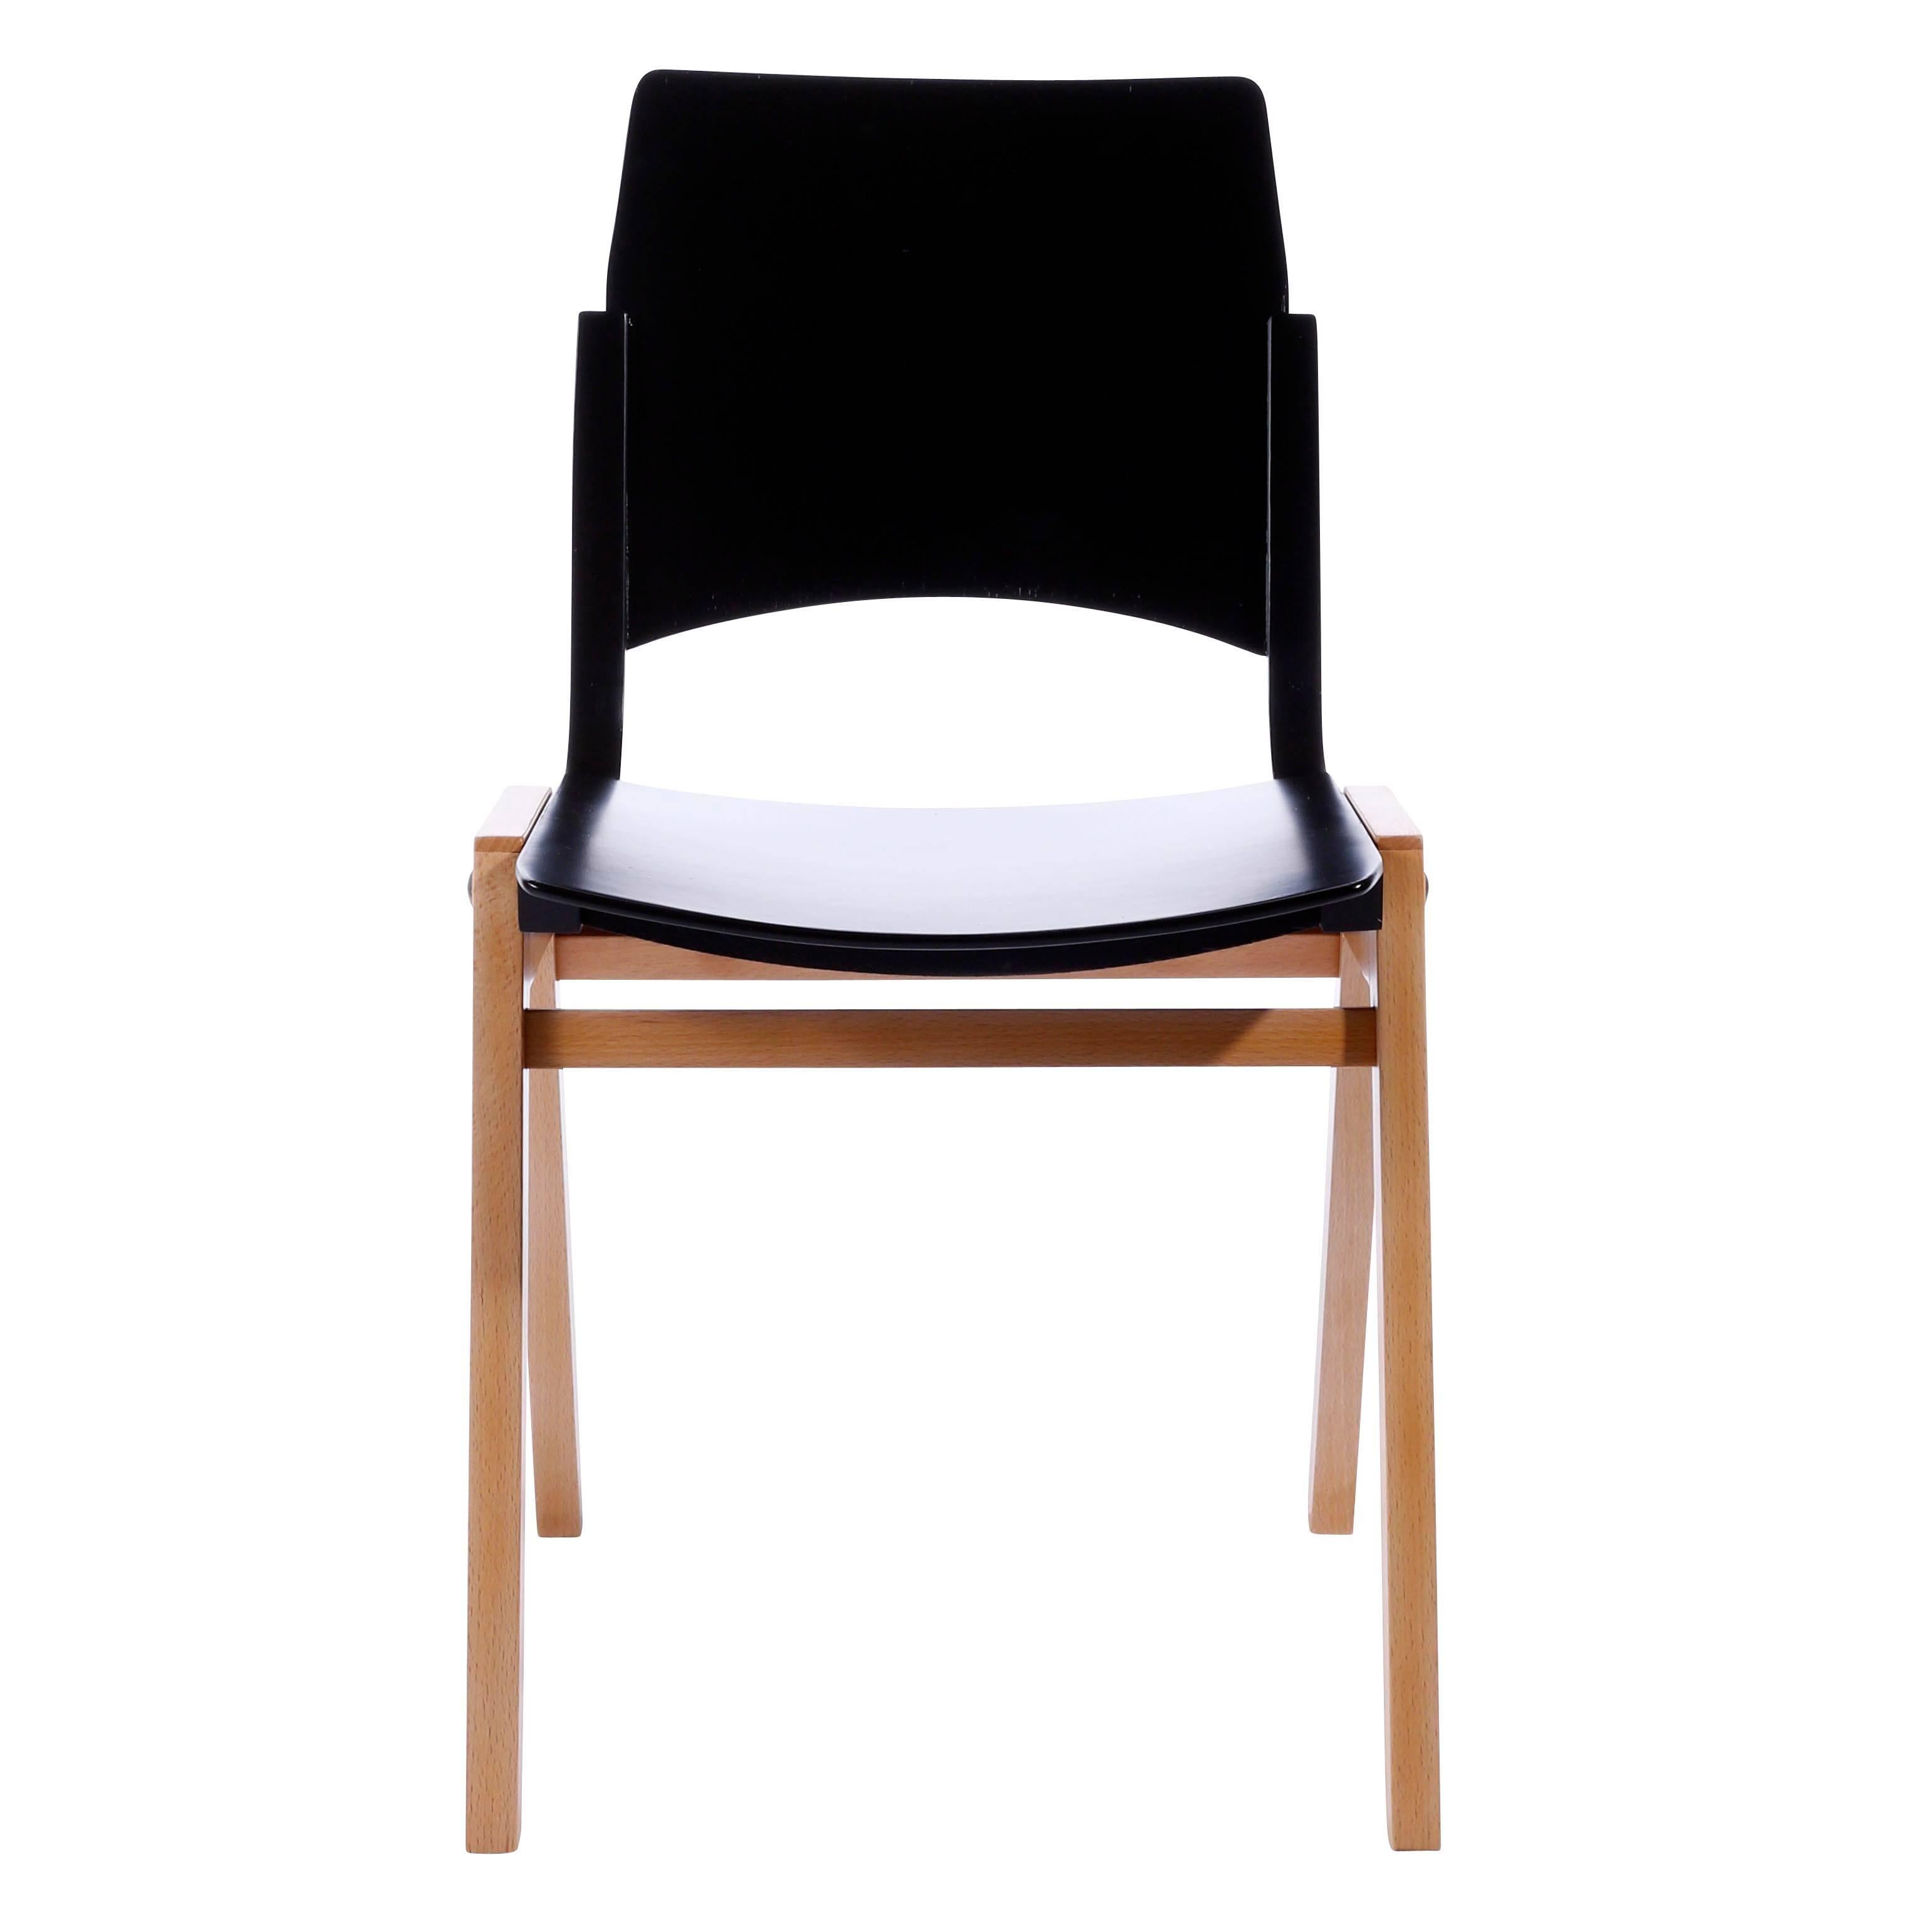 Mid-Century Modern Set of 20 Roland Rainer Stacking Chairs P7, Bicolored Beech, Austria, 1952